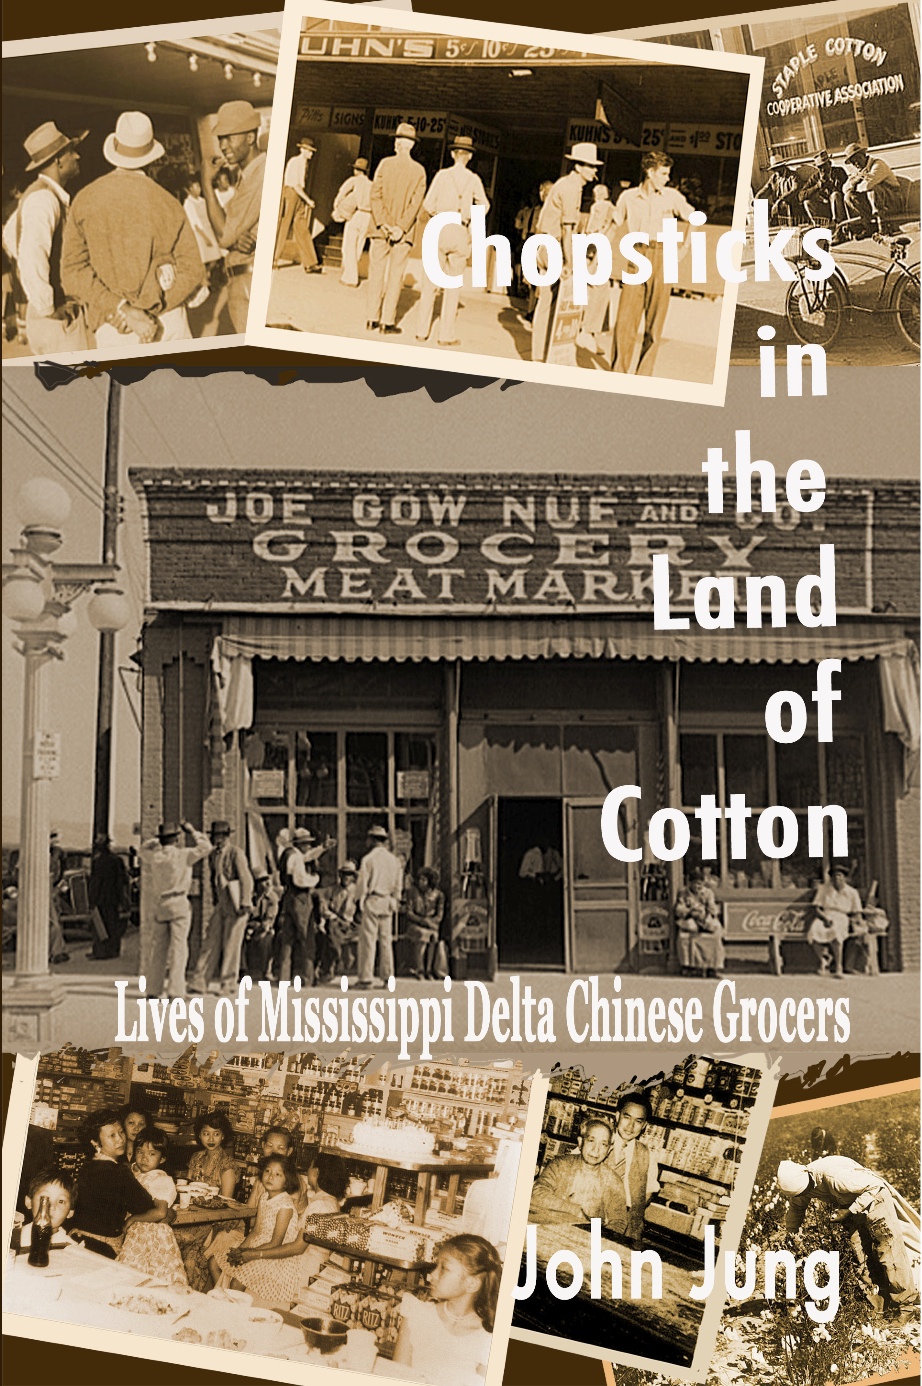 Chopsticks in the Land of Cotton: Lives of Mississipi Delta Chinese Grocers